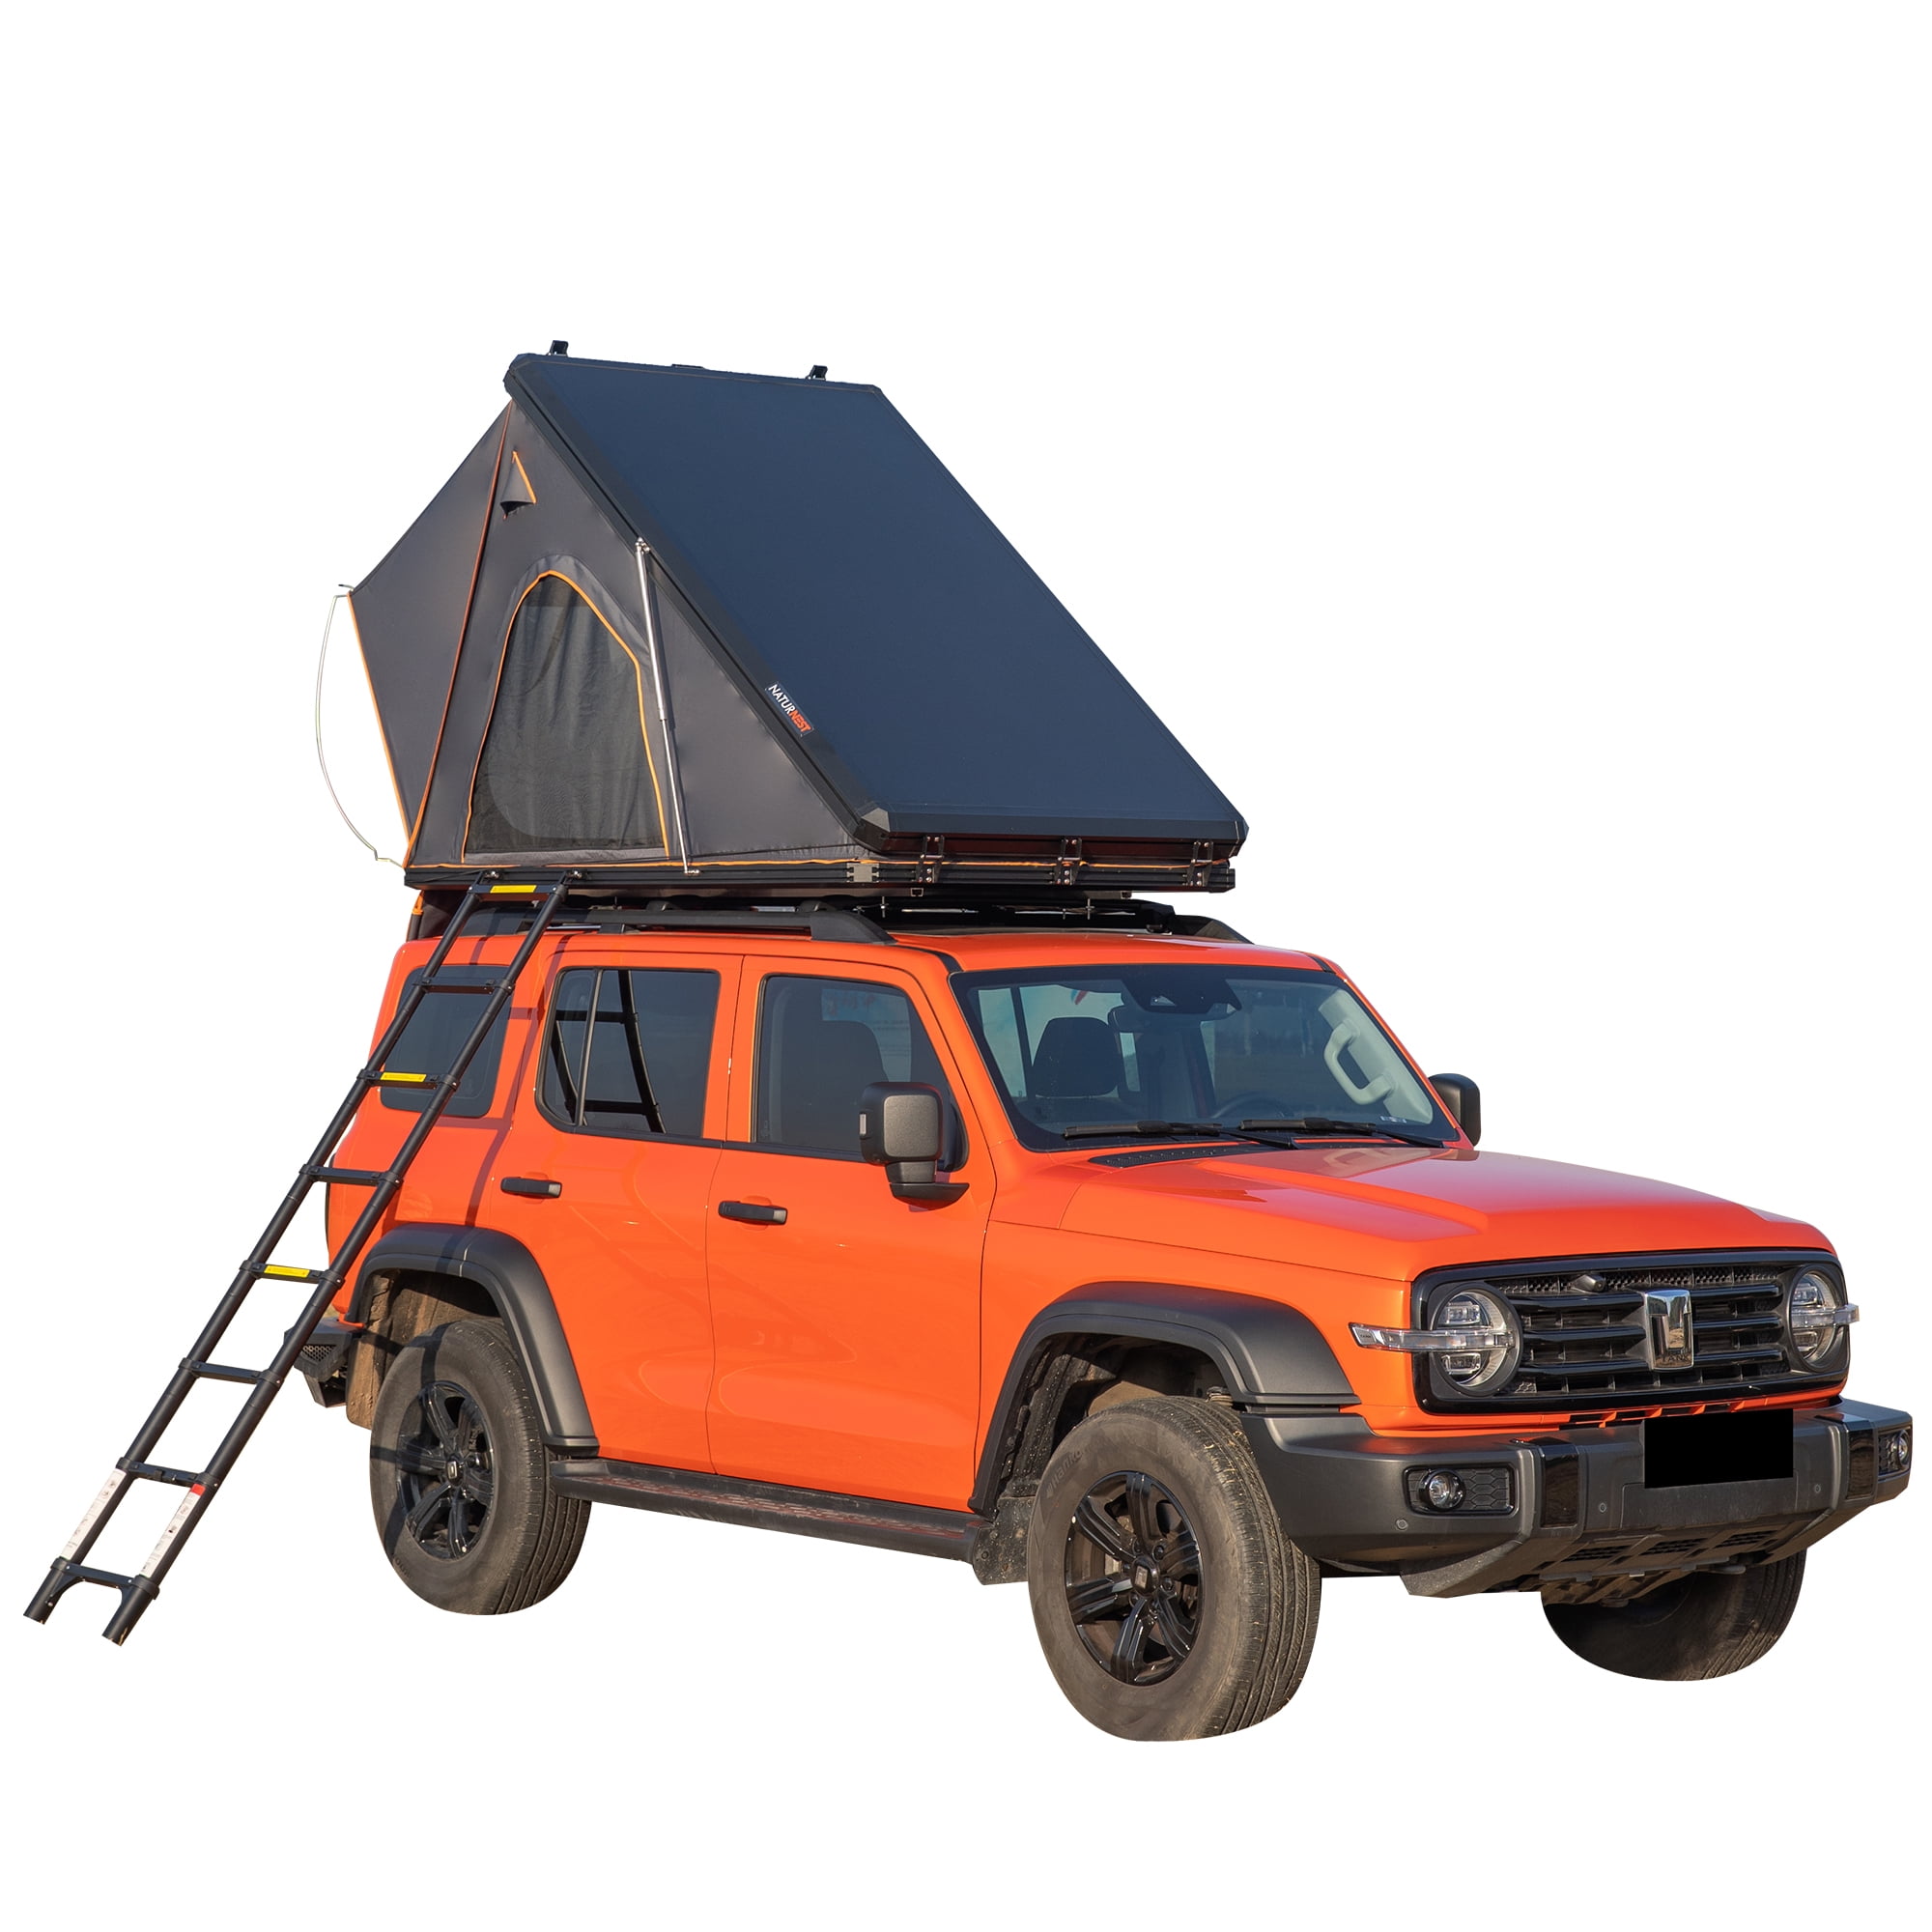 SUFUL Aluminium Pop Up Rooftop Tent Hard Shell For Camping SUV with 2  luggage Bar+LED Light+Mat, Van Jeep Car SUV Truck Tents for Camping,  Hardshell